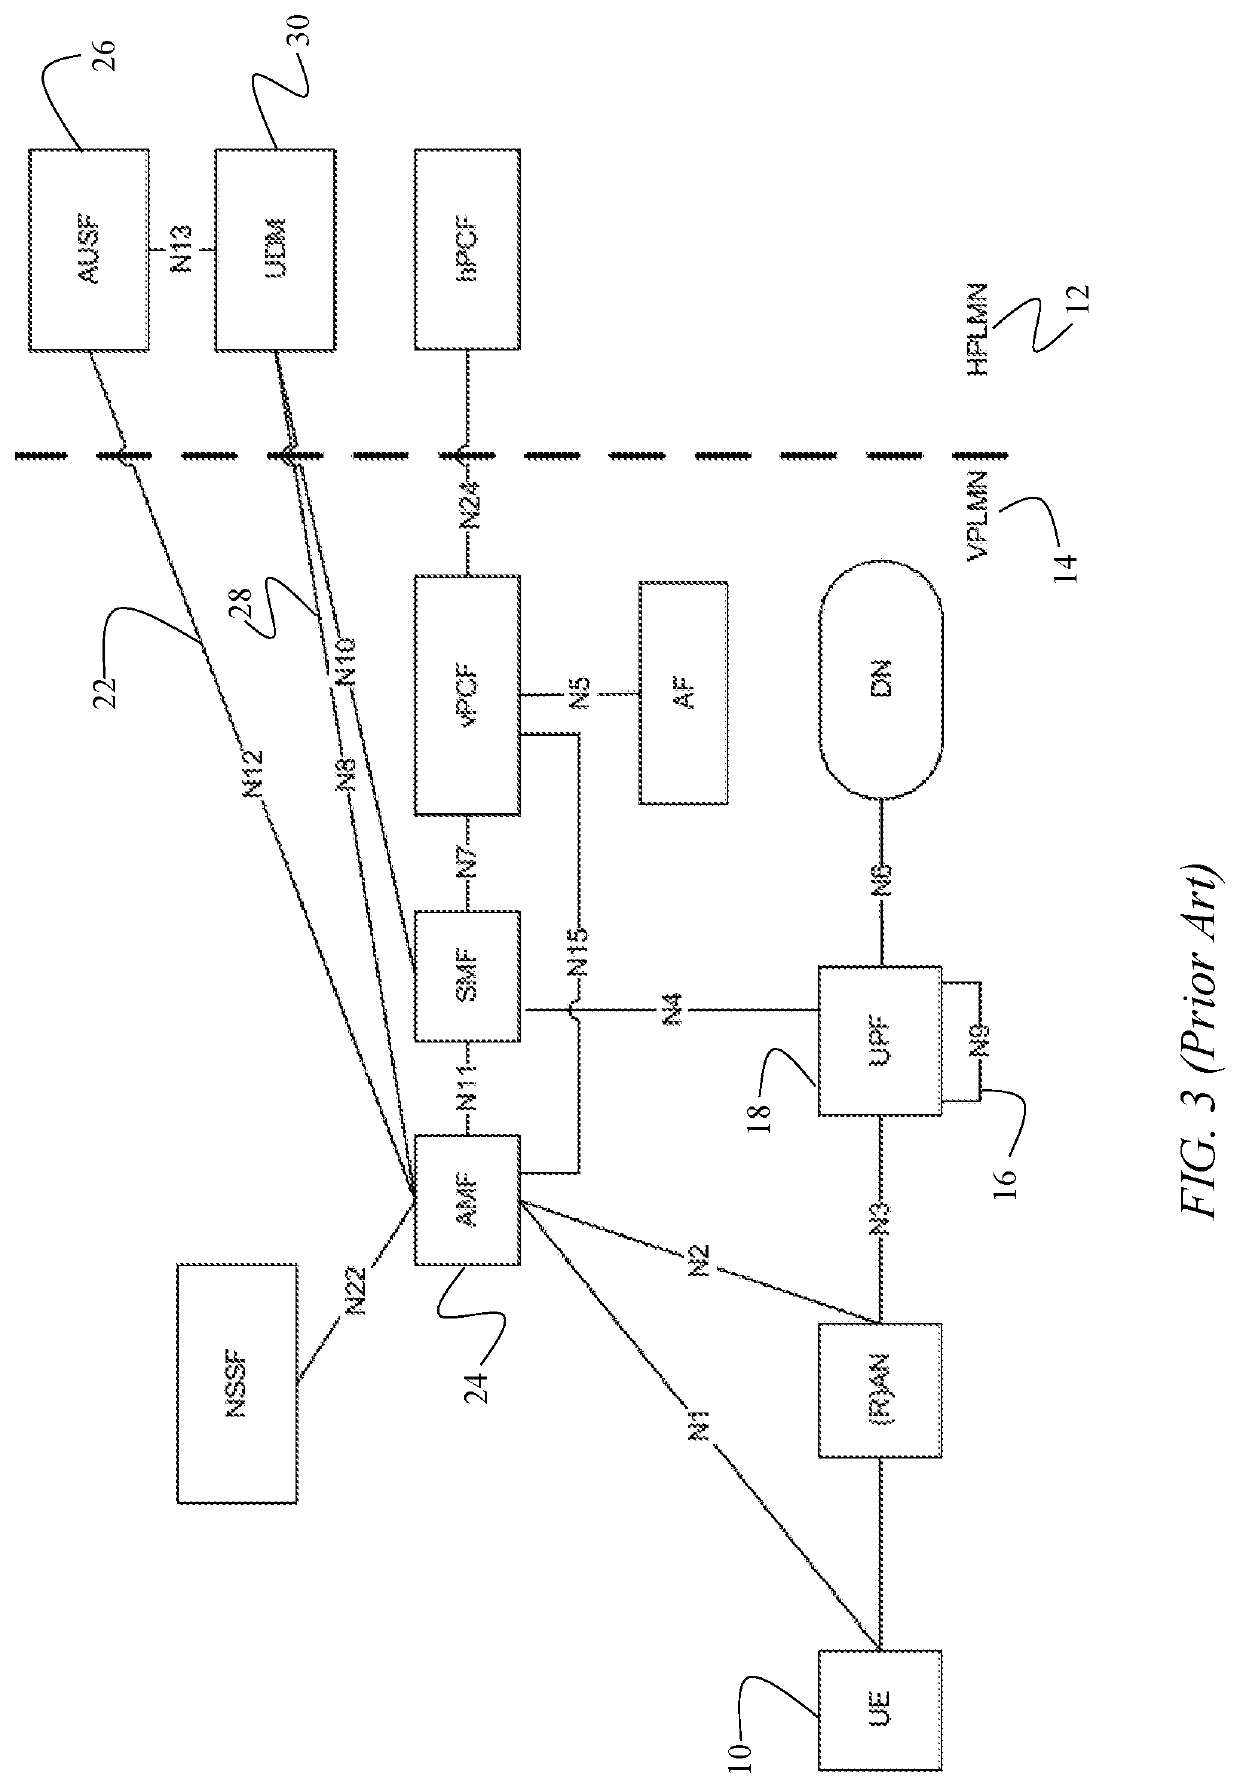 Steering of roaming for 5G core roaming in an internet packet exchange network